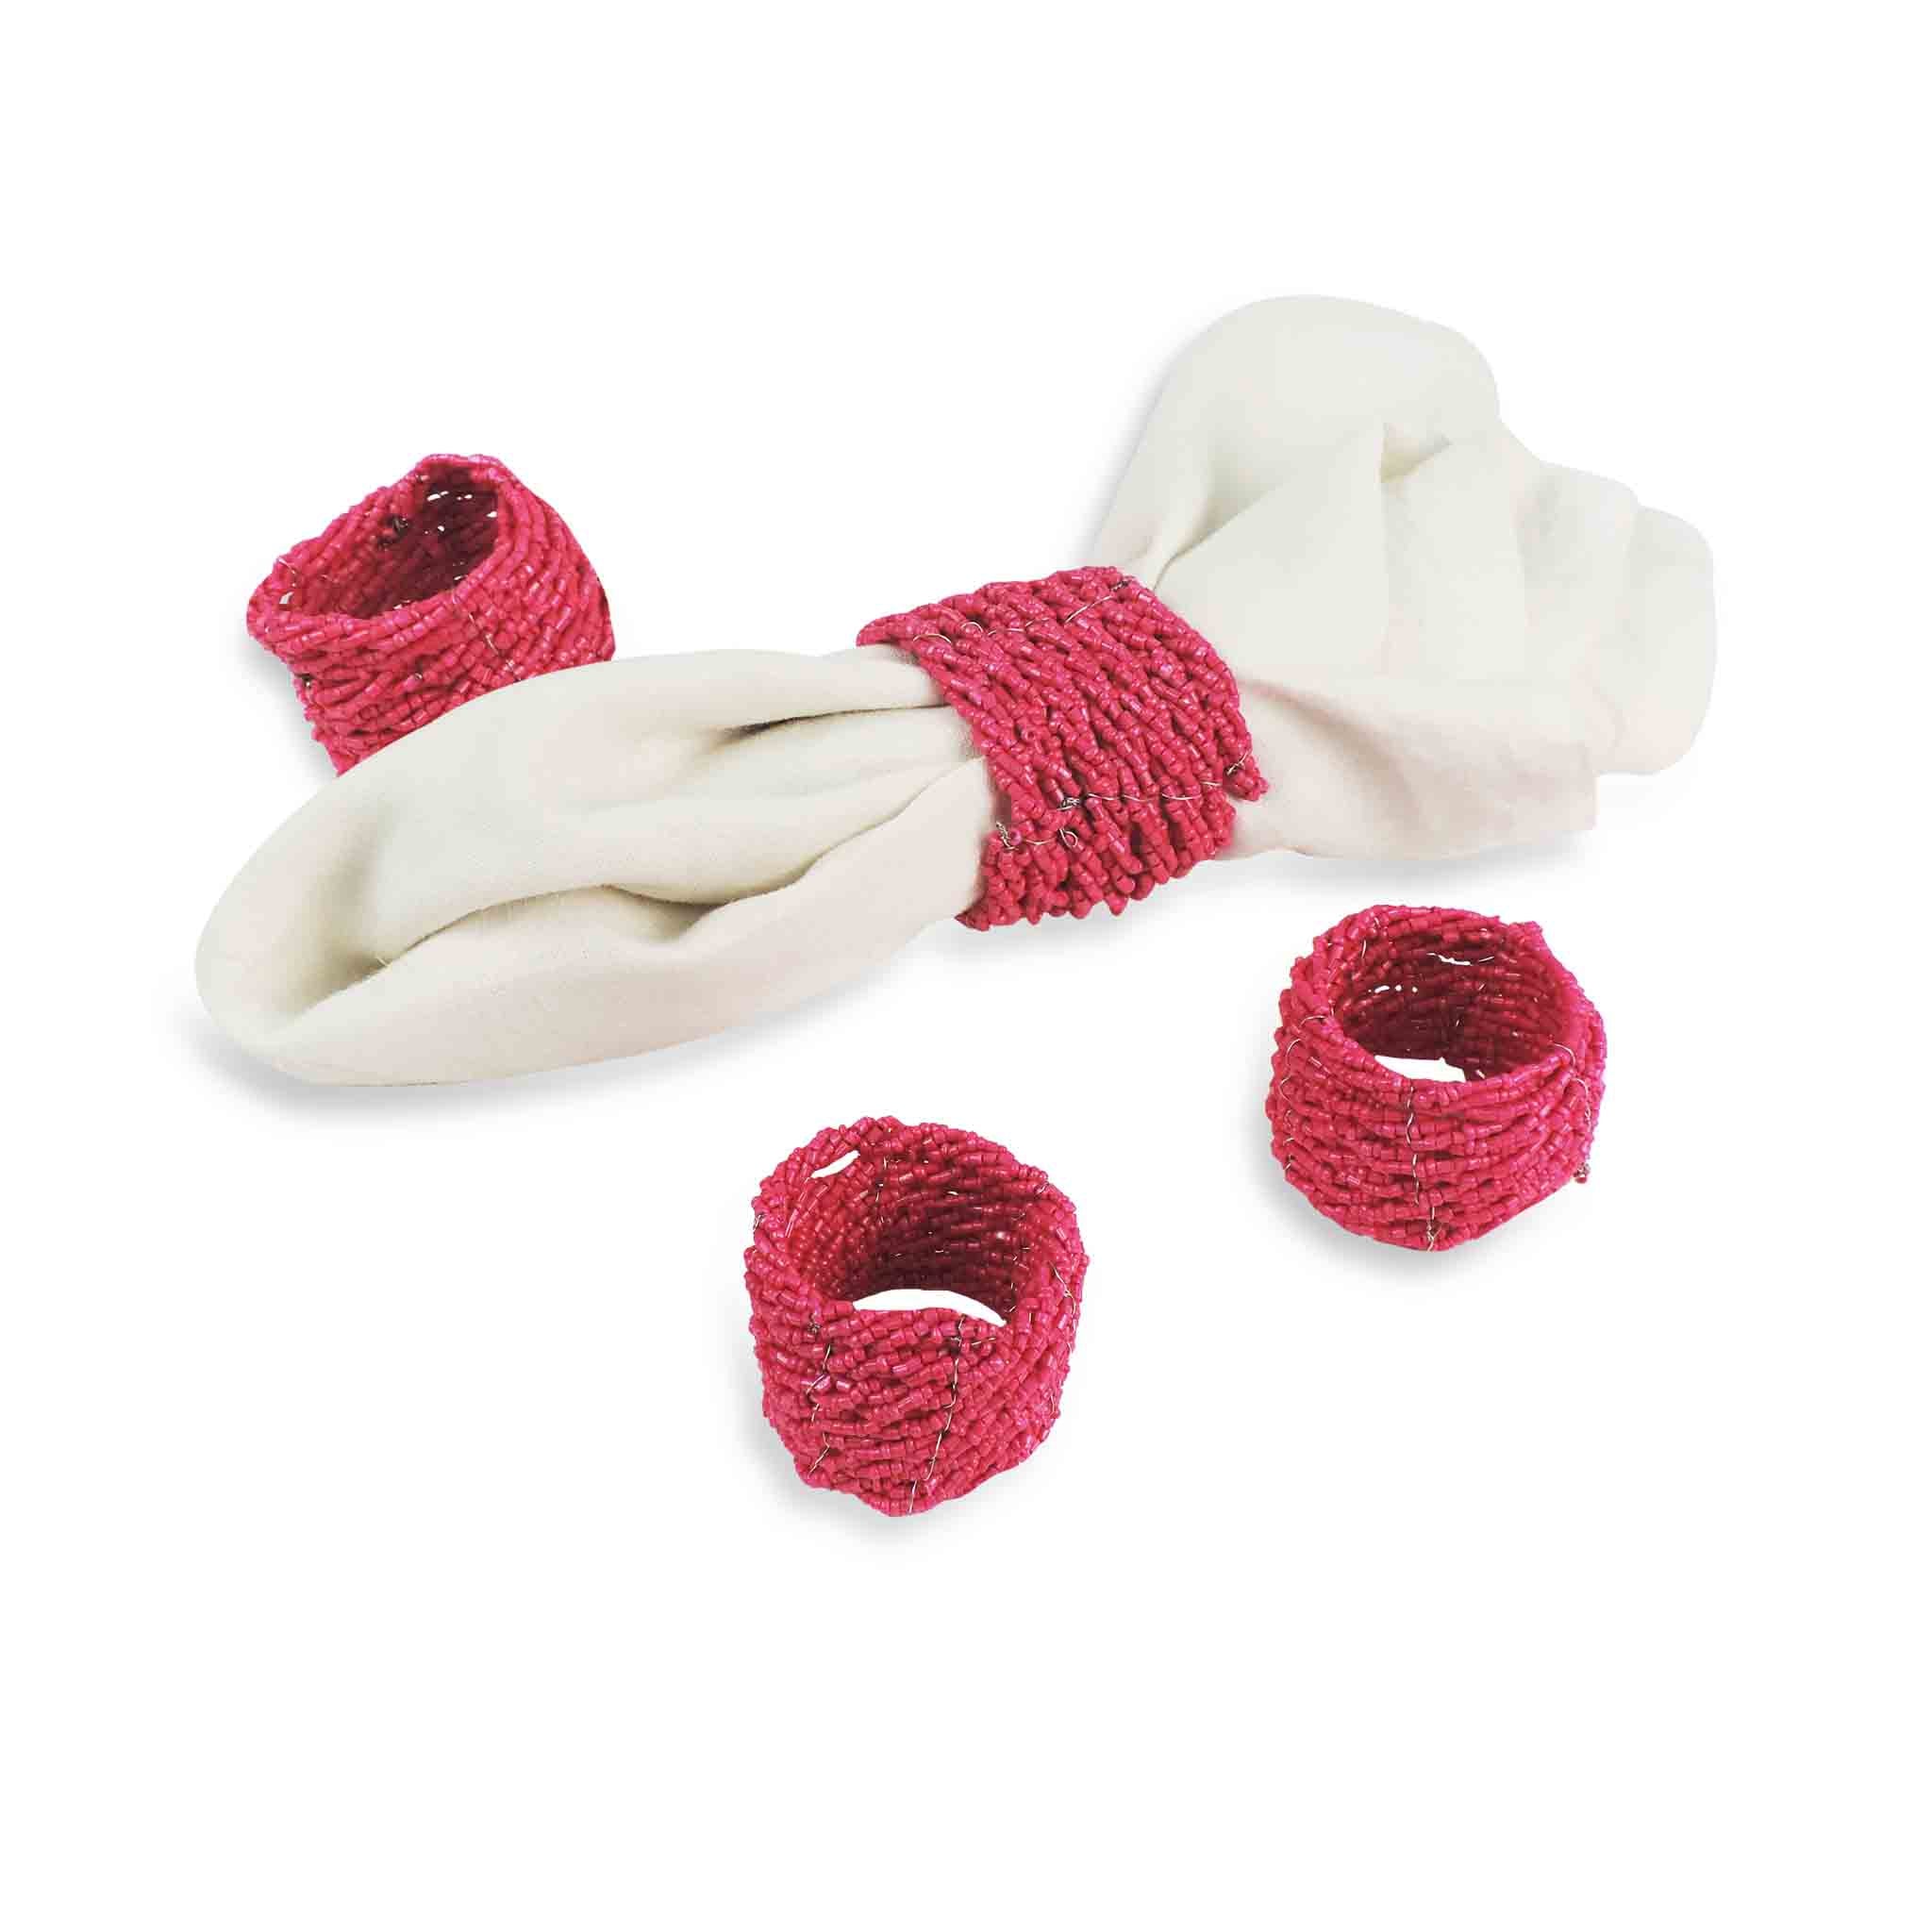 Jute Coil Napkin Ring in Pink, Set of 4